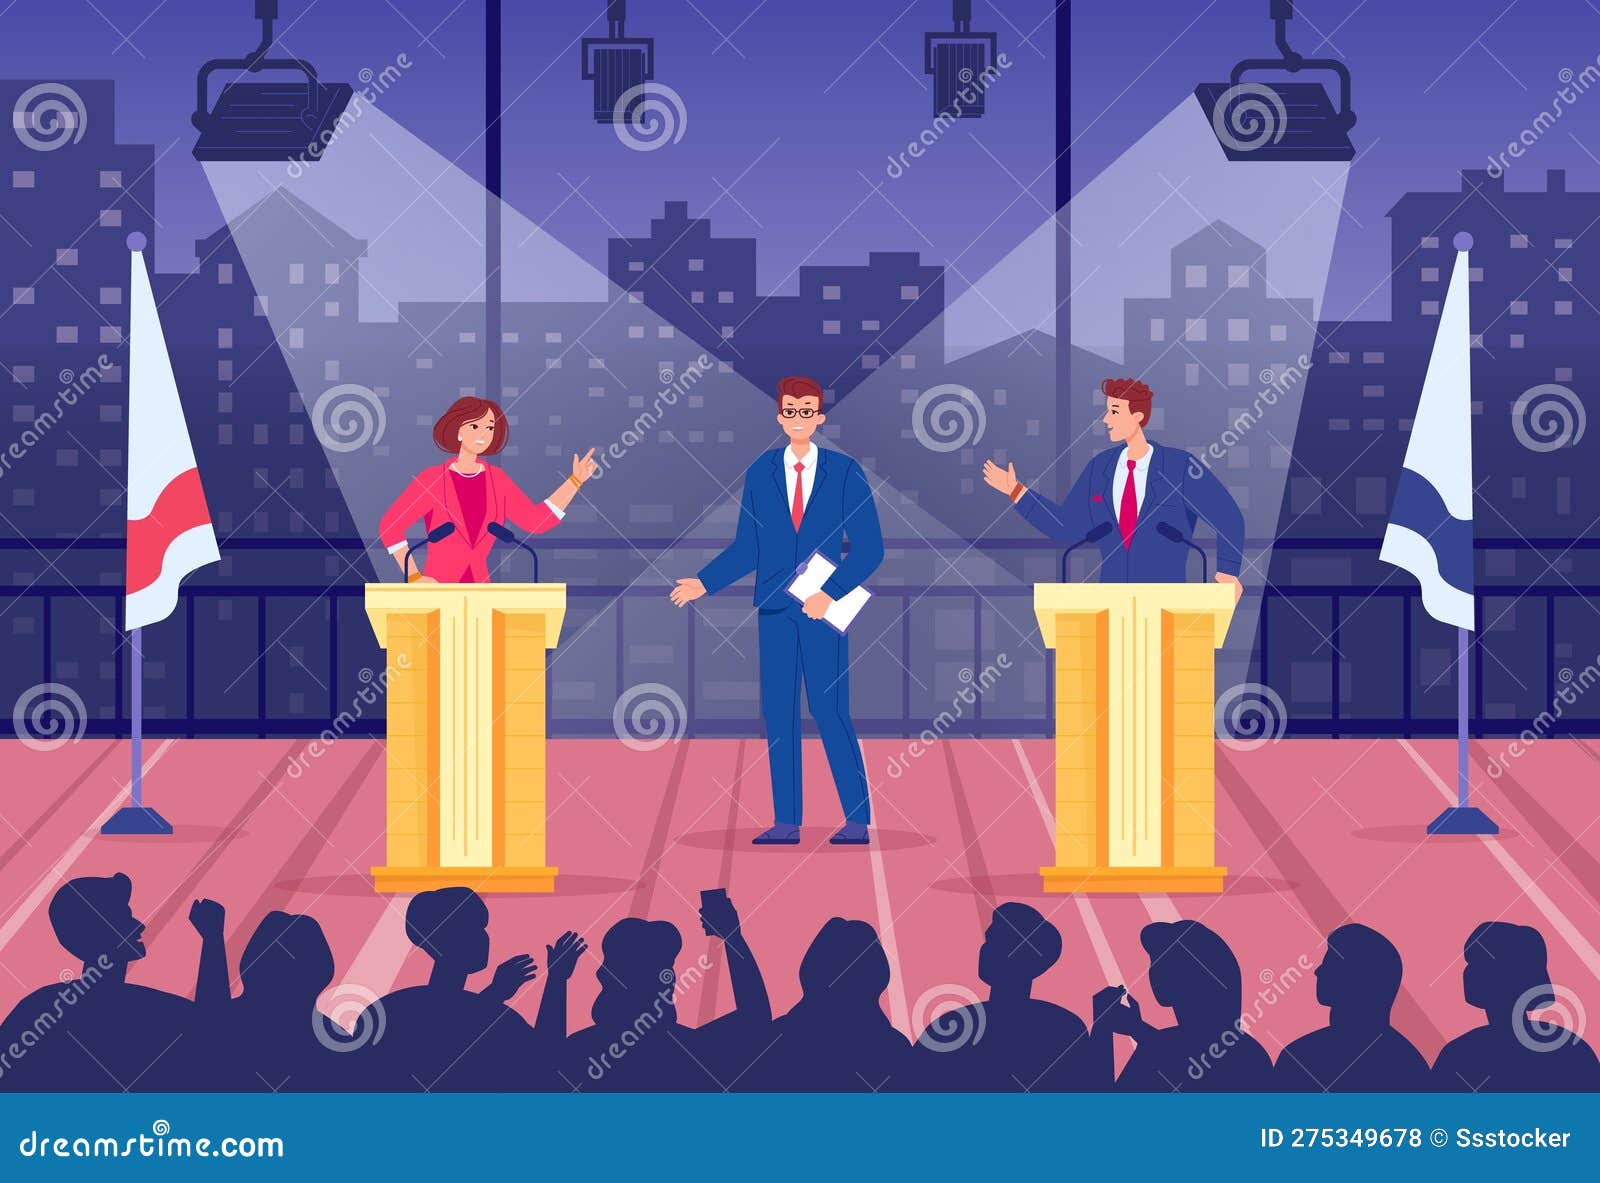 political talk show. two politico speaking on debate audience stage tv broadcast, professional speakers leader politics